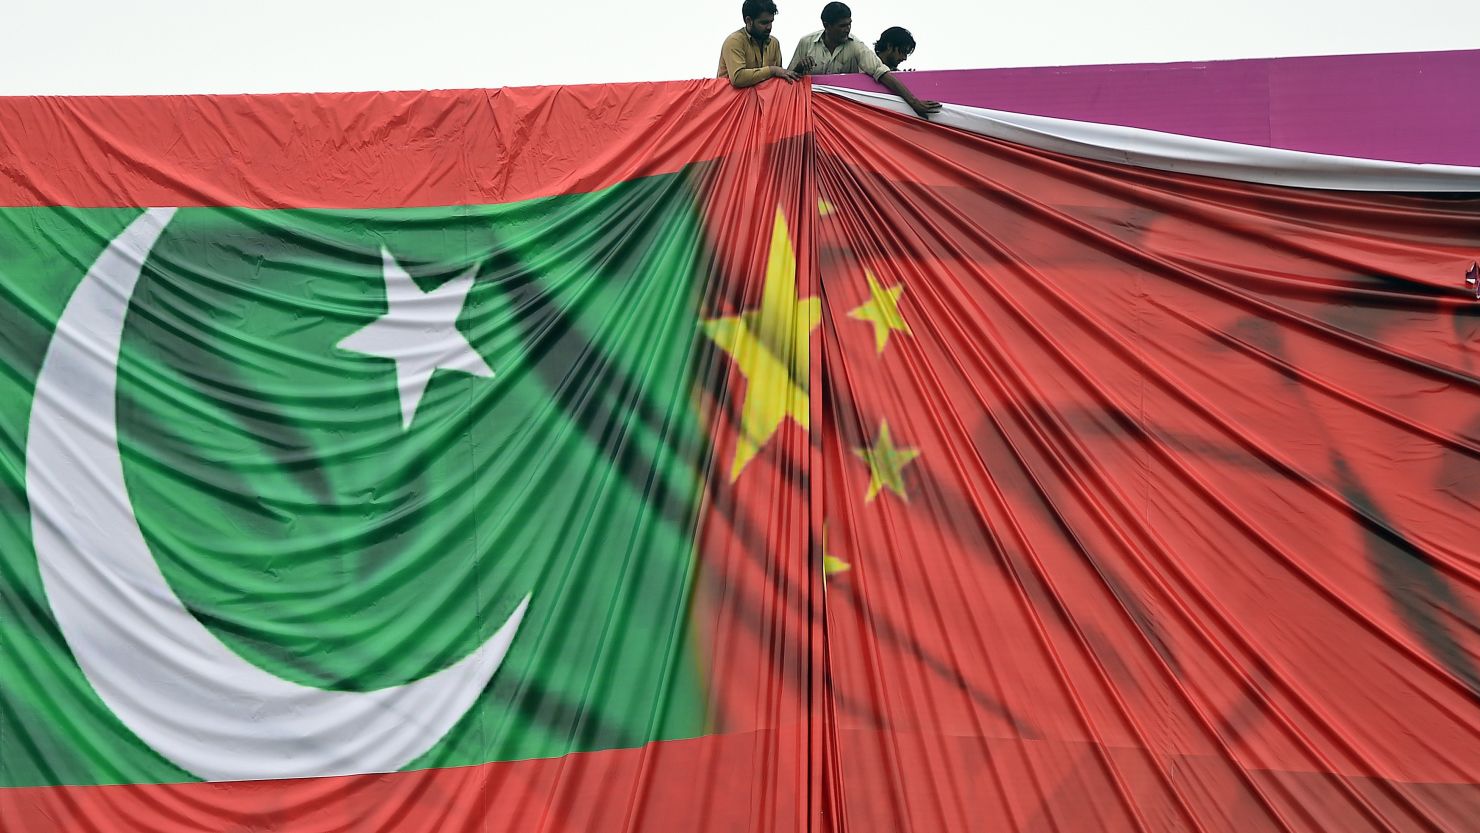 The Chinese and Pakistani flags, ahead of Chinese President Xi Jinping visit to Pakistan in April.